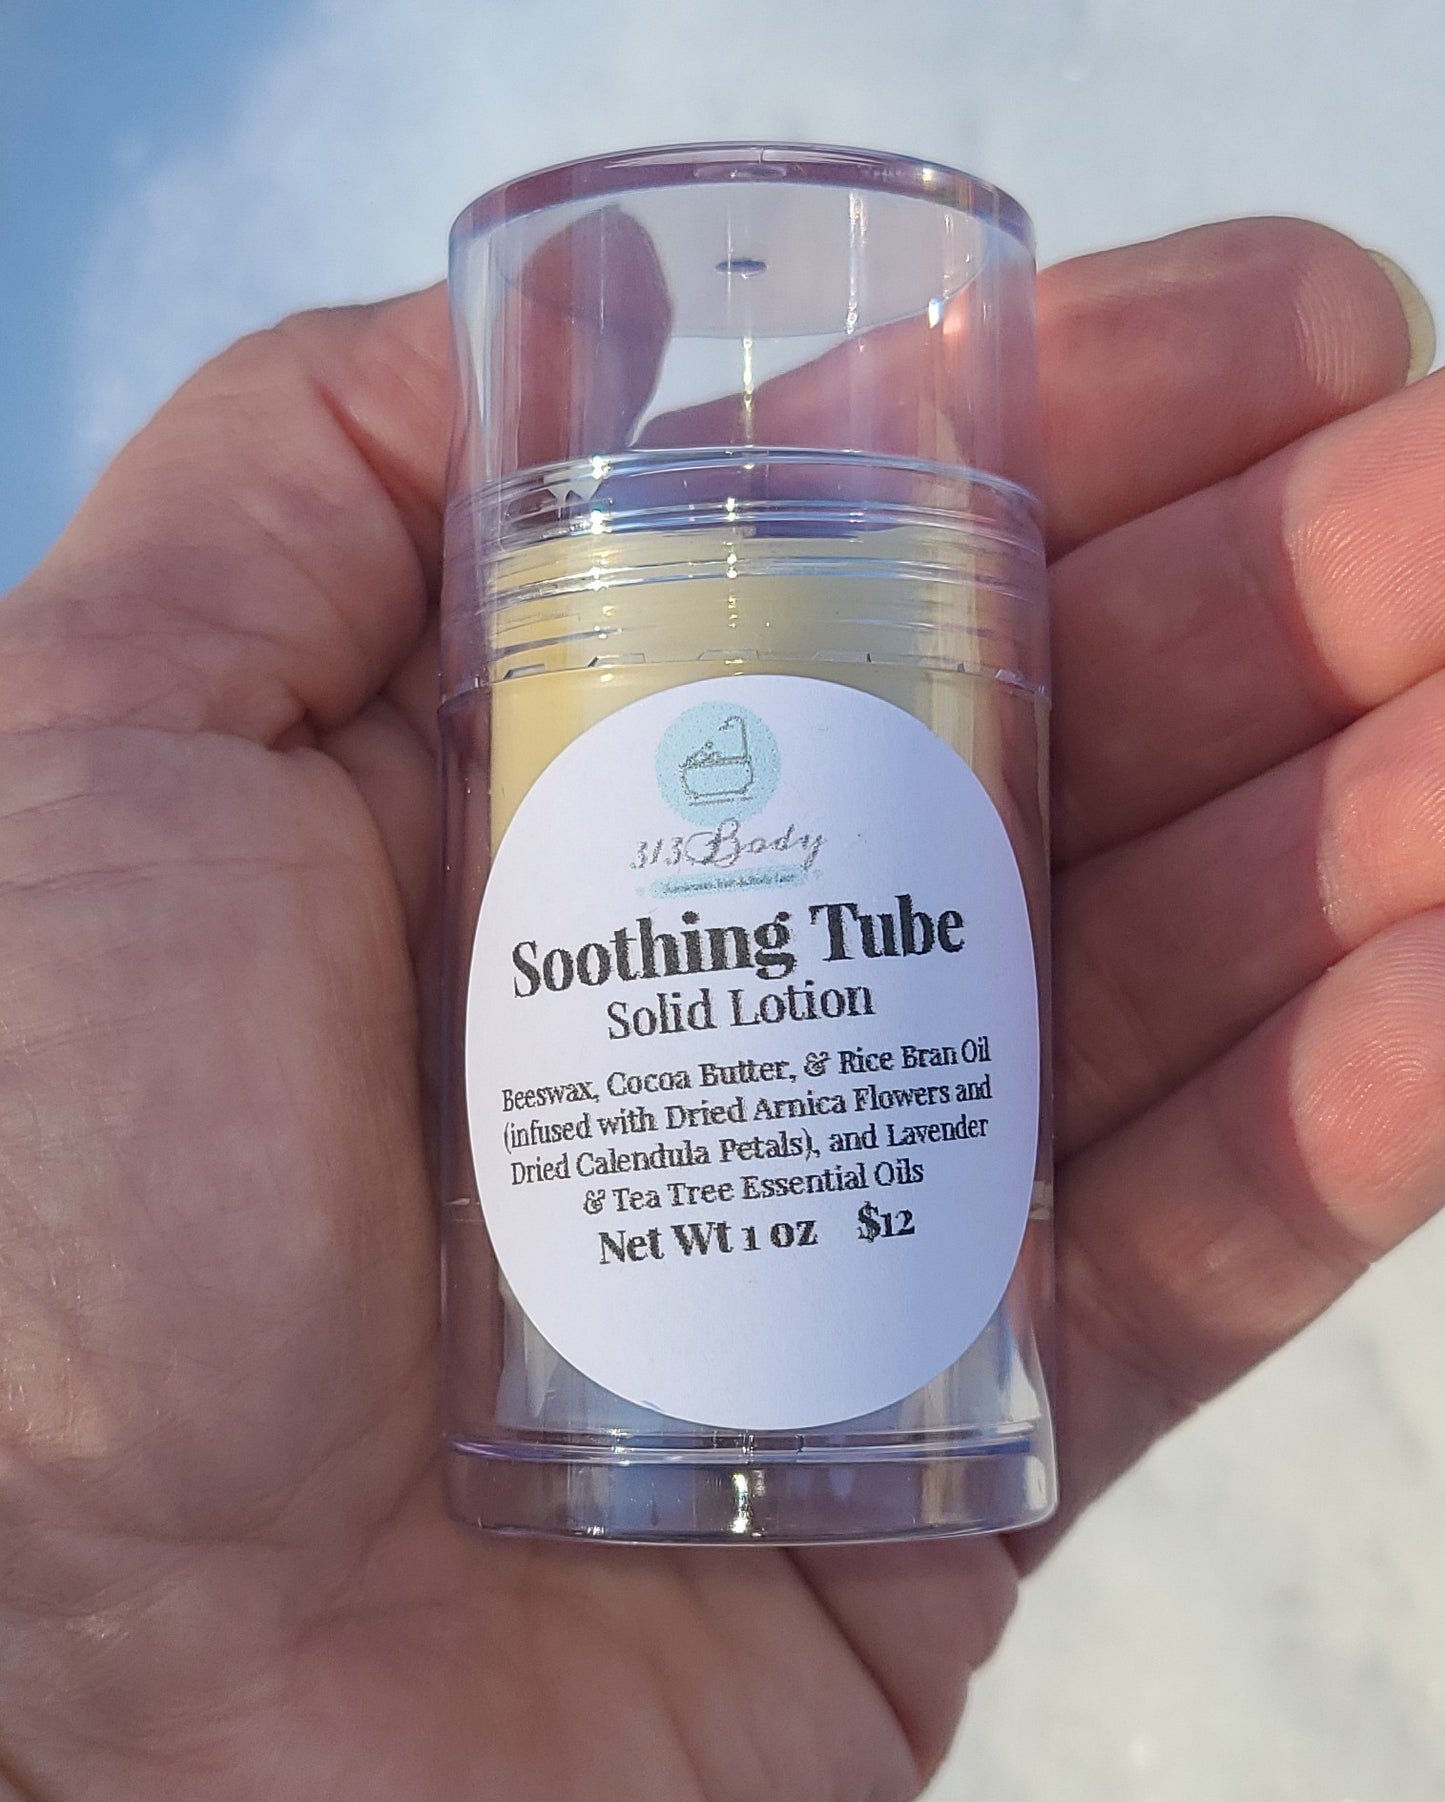 "SOOTHING TUBE" Solid Lotion